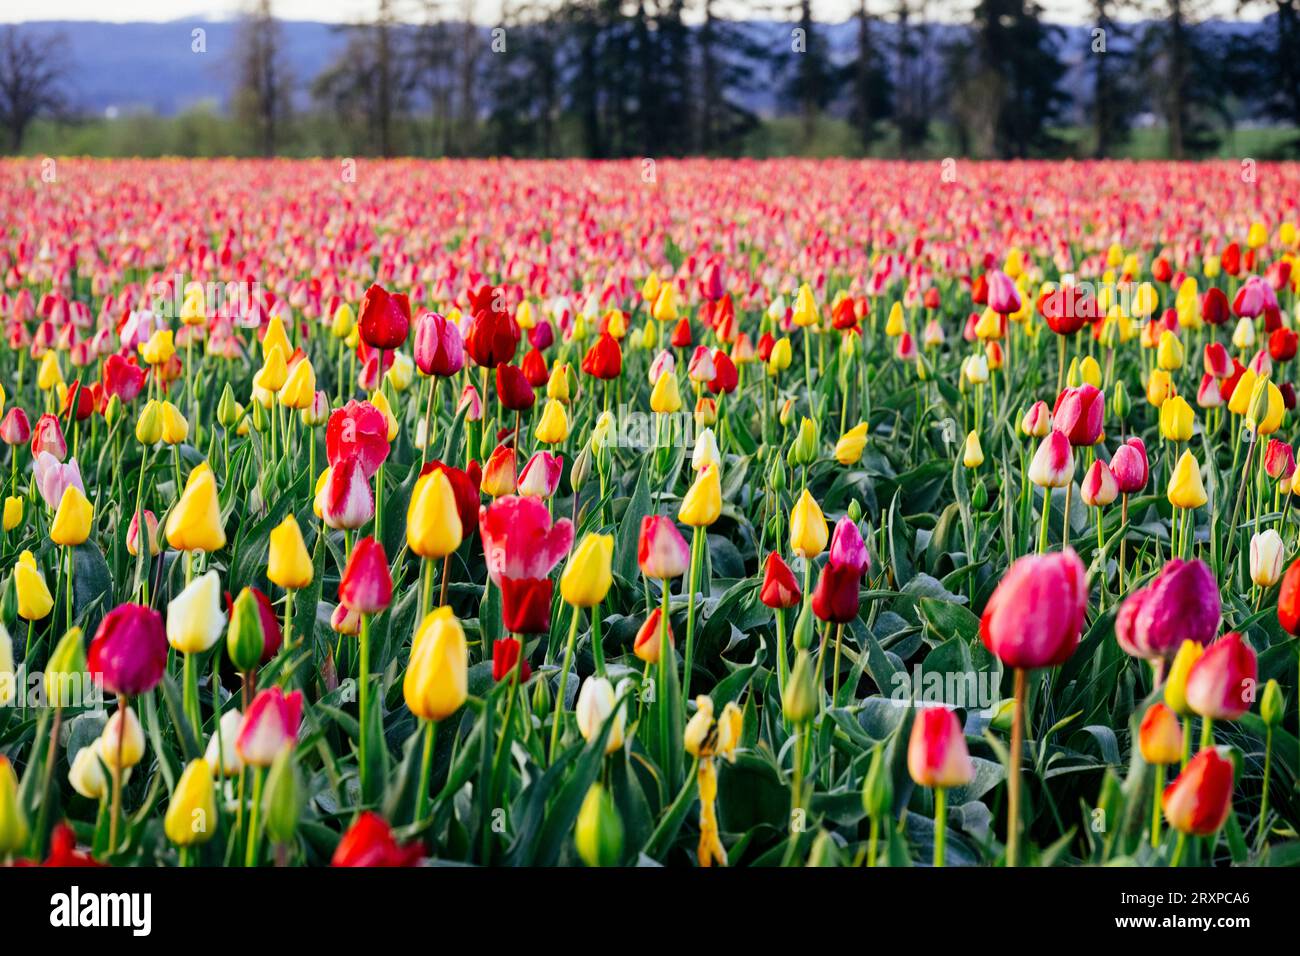 Field of red and yellow tulips Stock Photo